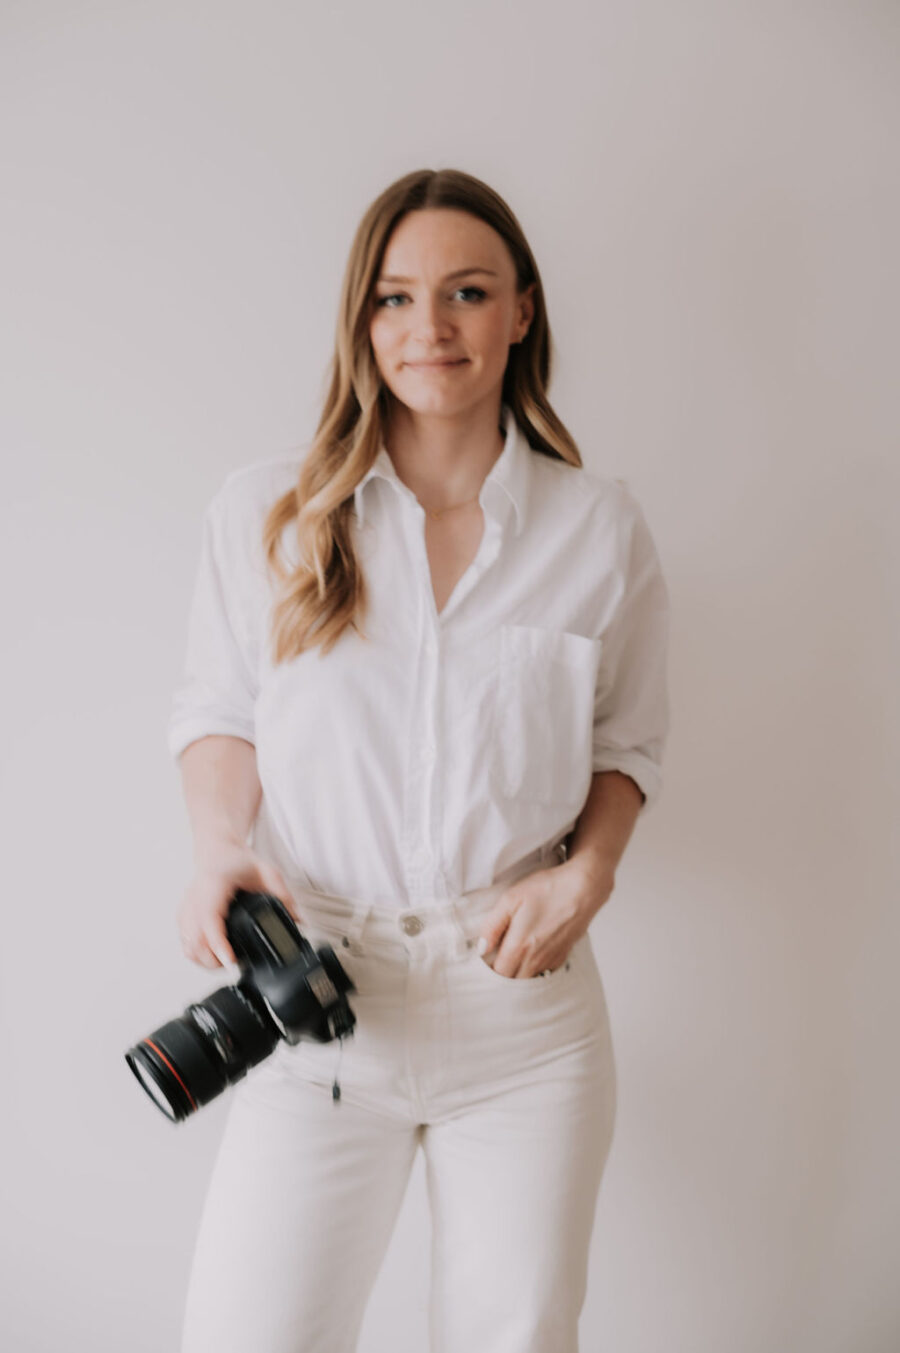 Part-Time Assistant Role: blonde girl standing against white backdrop with white shirt and cream jeans, hand in pocket, holding a camera.